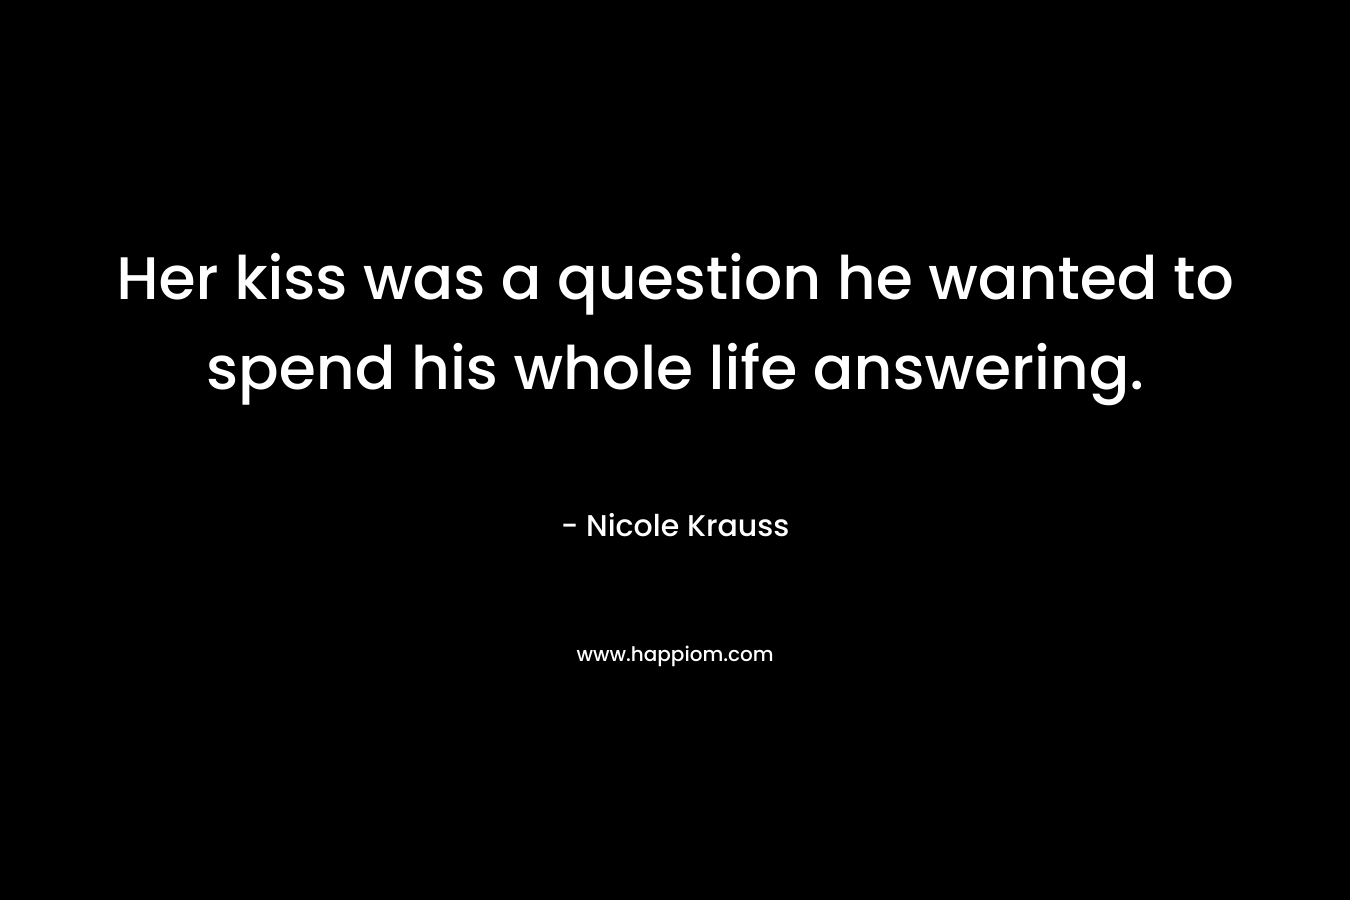 Her kiss was a question he wanted to spend his whole life answering. – Nicole Krauss